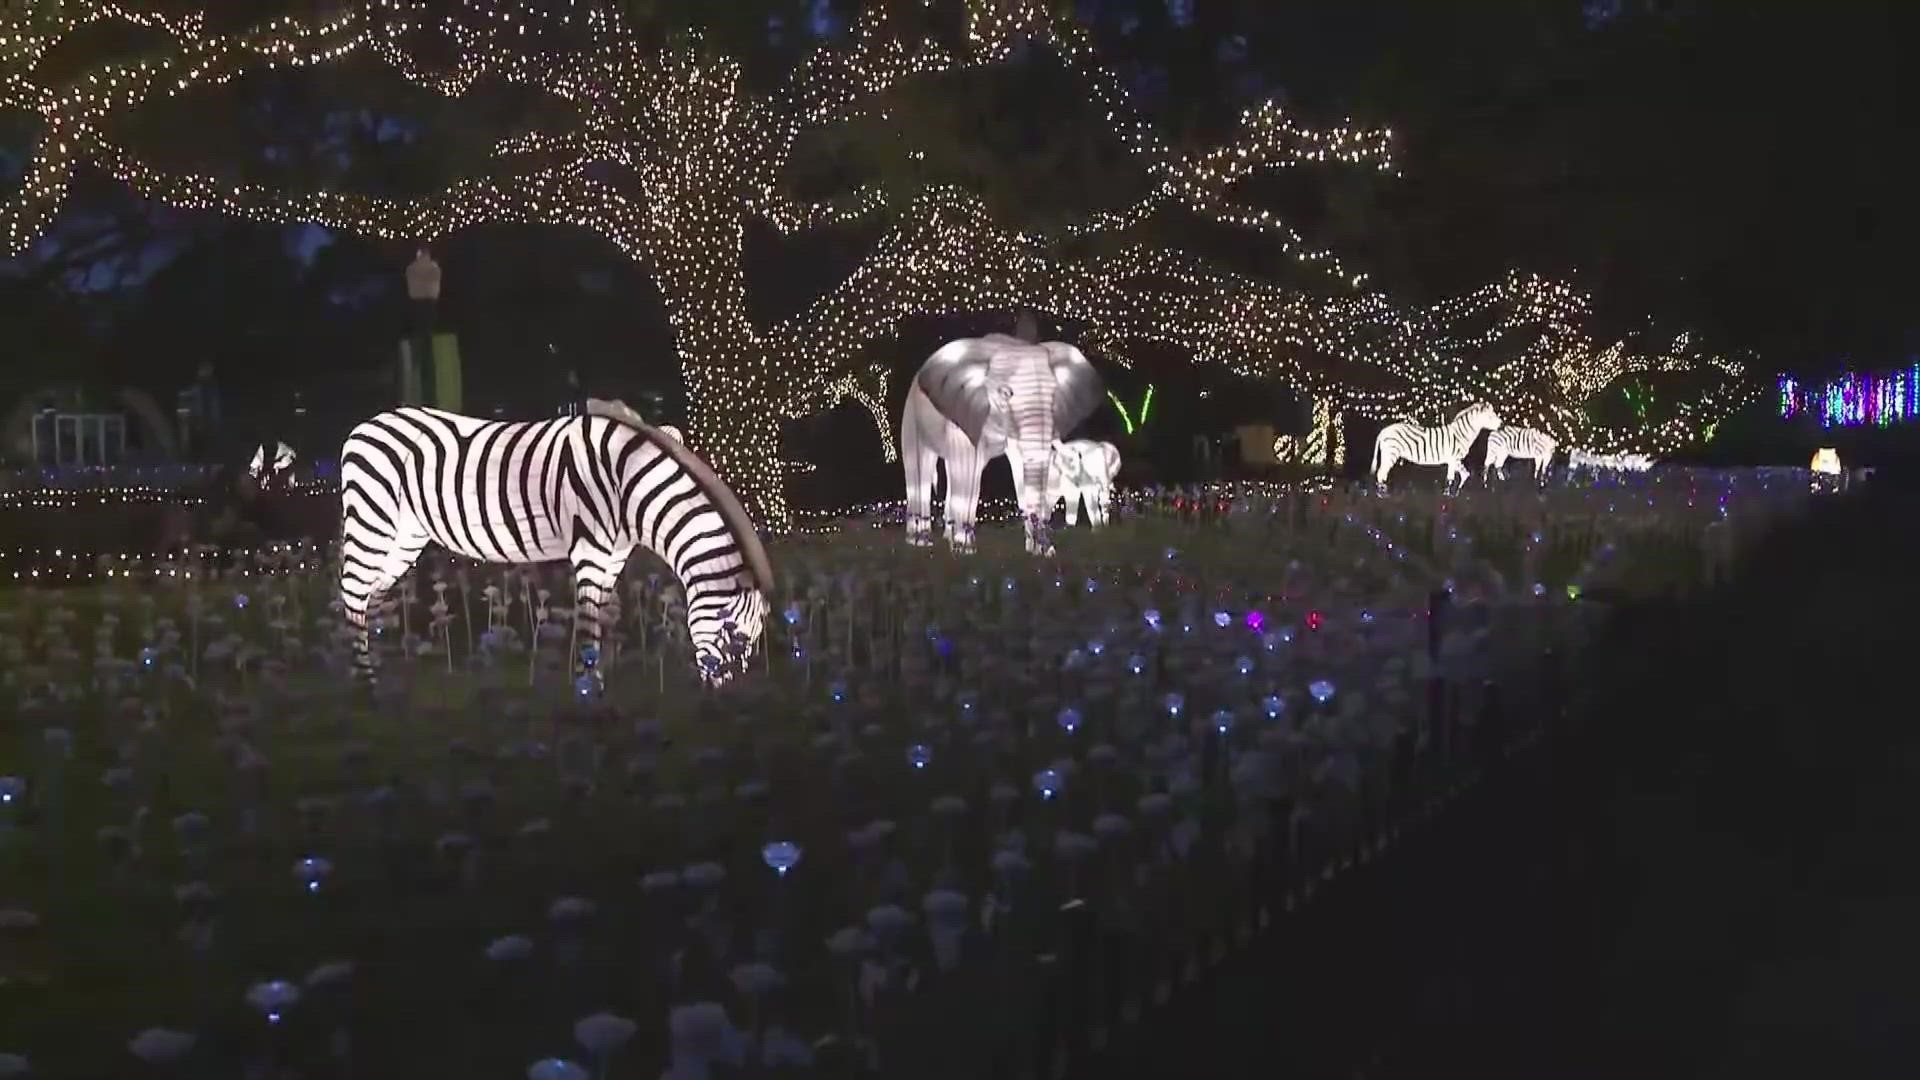 Stroll through the Houston Zoo to see their lovely holiday lights from Nov. 18 to Jan. 8. It's the perfect setting to enjoy the sights and sounds of the season.